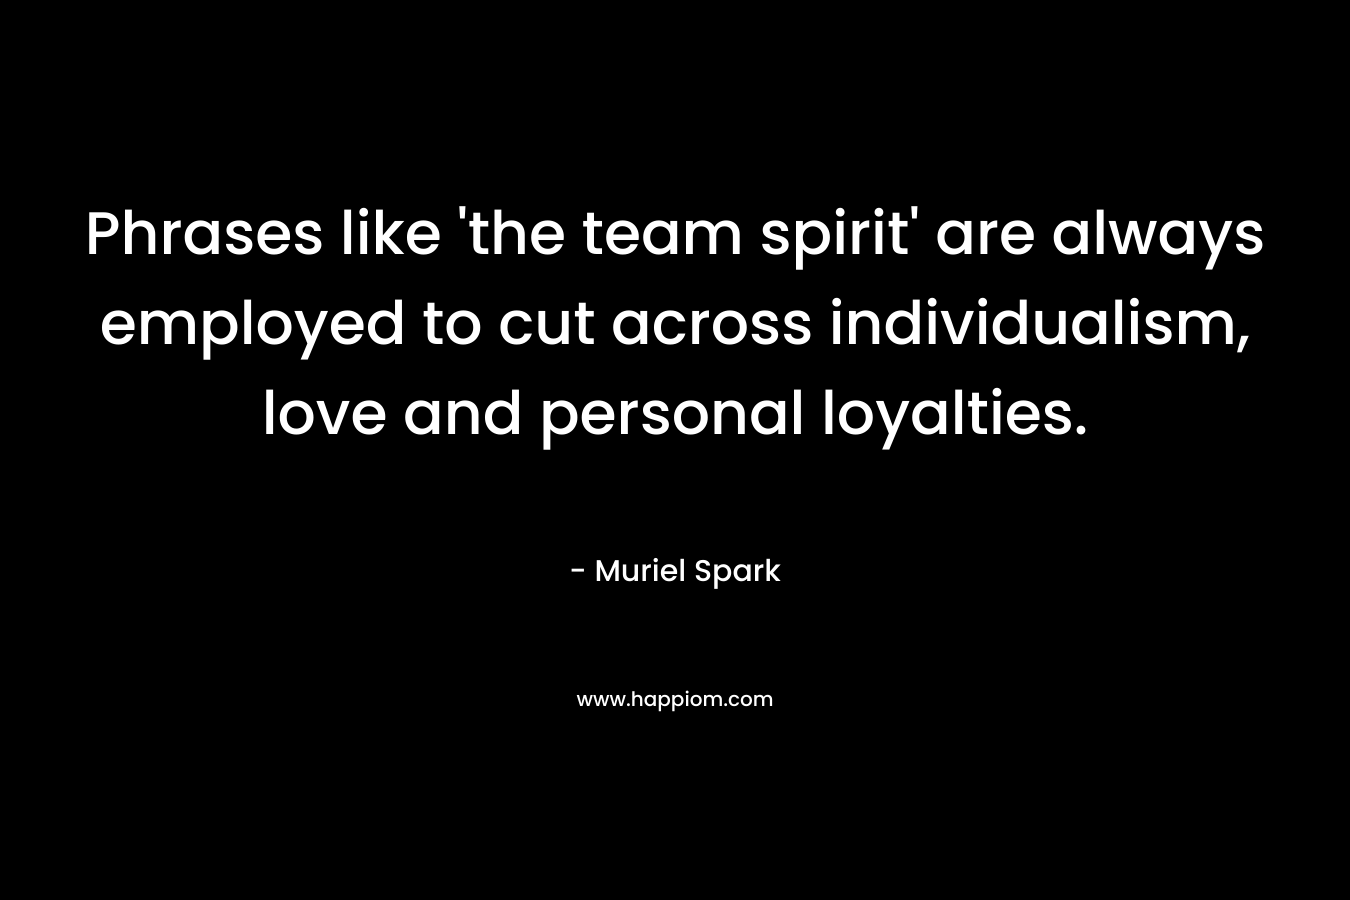 Phrases like ‘the team spirit’ are always employed to cut across individualism, love and personal loyalties. – Muriel Spark